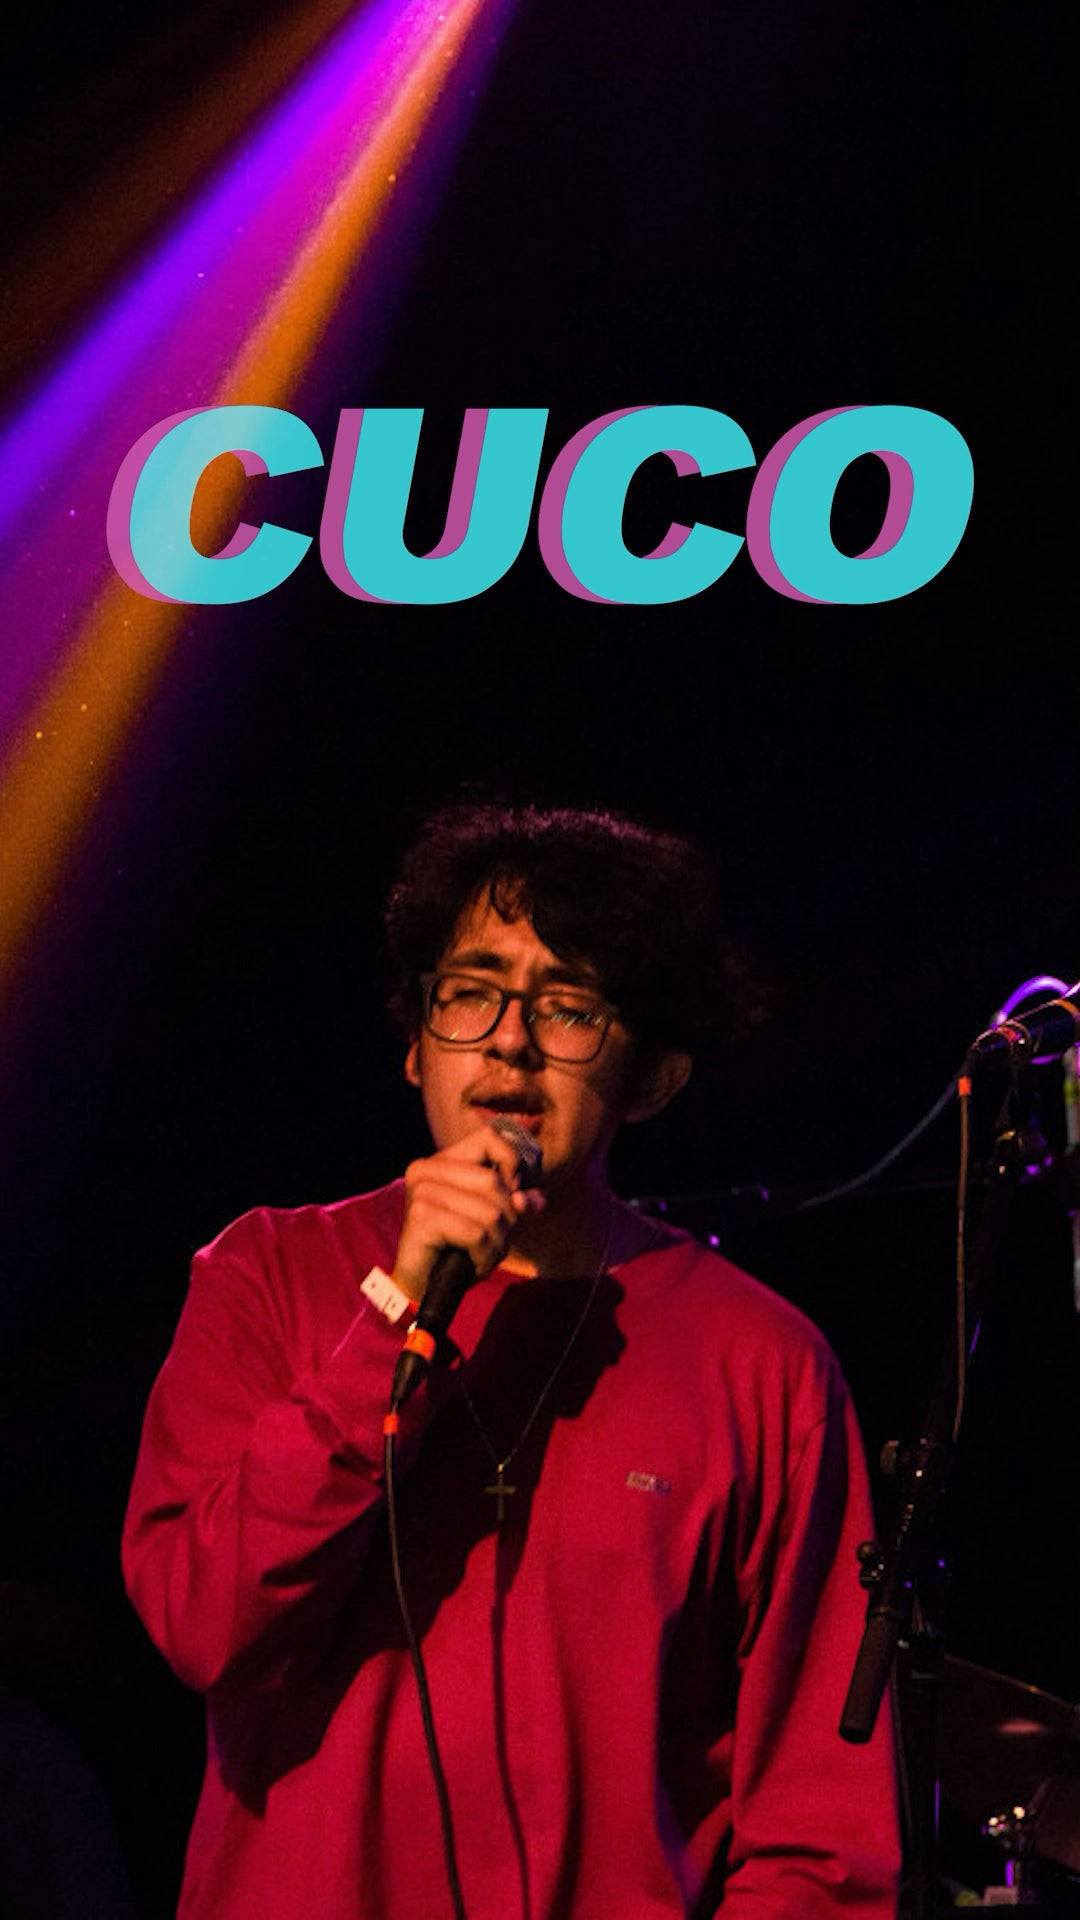 Cuco sets the mood for chill nights Wallpaper